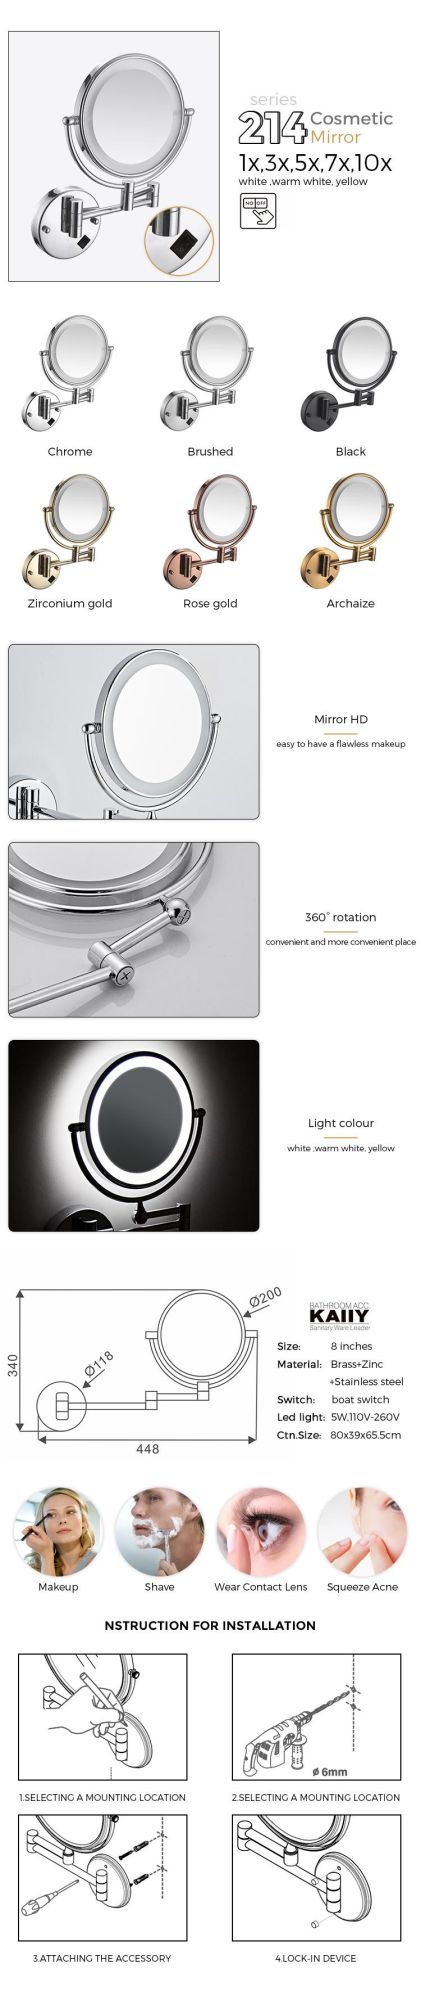 Kaiiy Boat Switch LED Cosmetic Mirror 2face Modern Bathroom Makeup Mirror for Wall Mounted Accessories